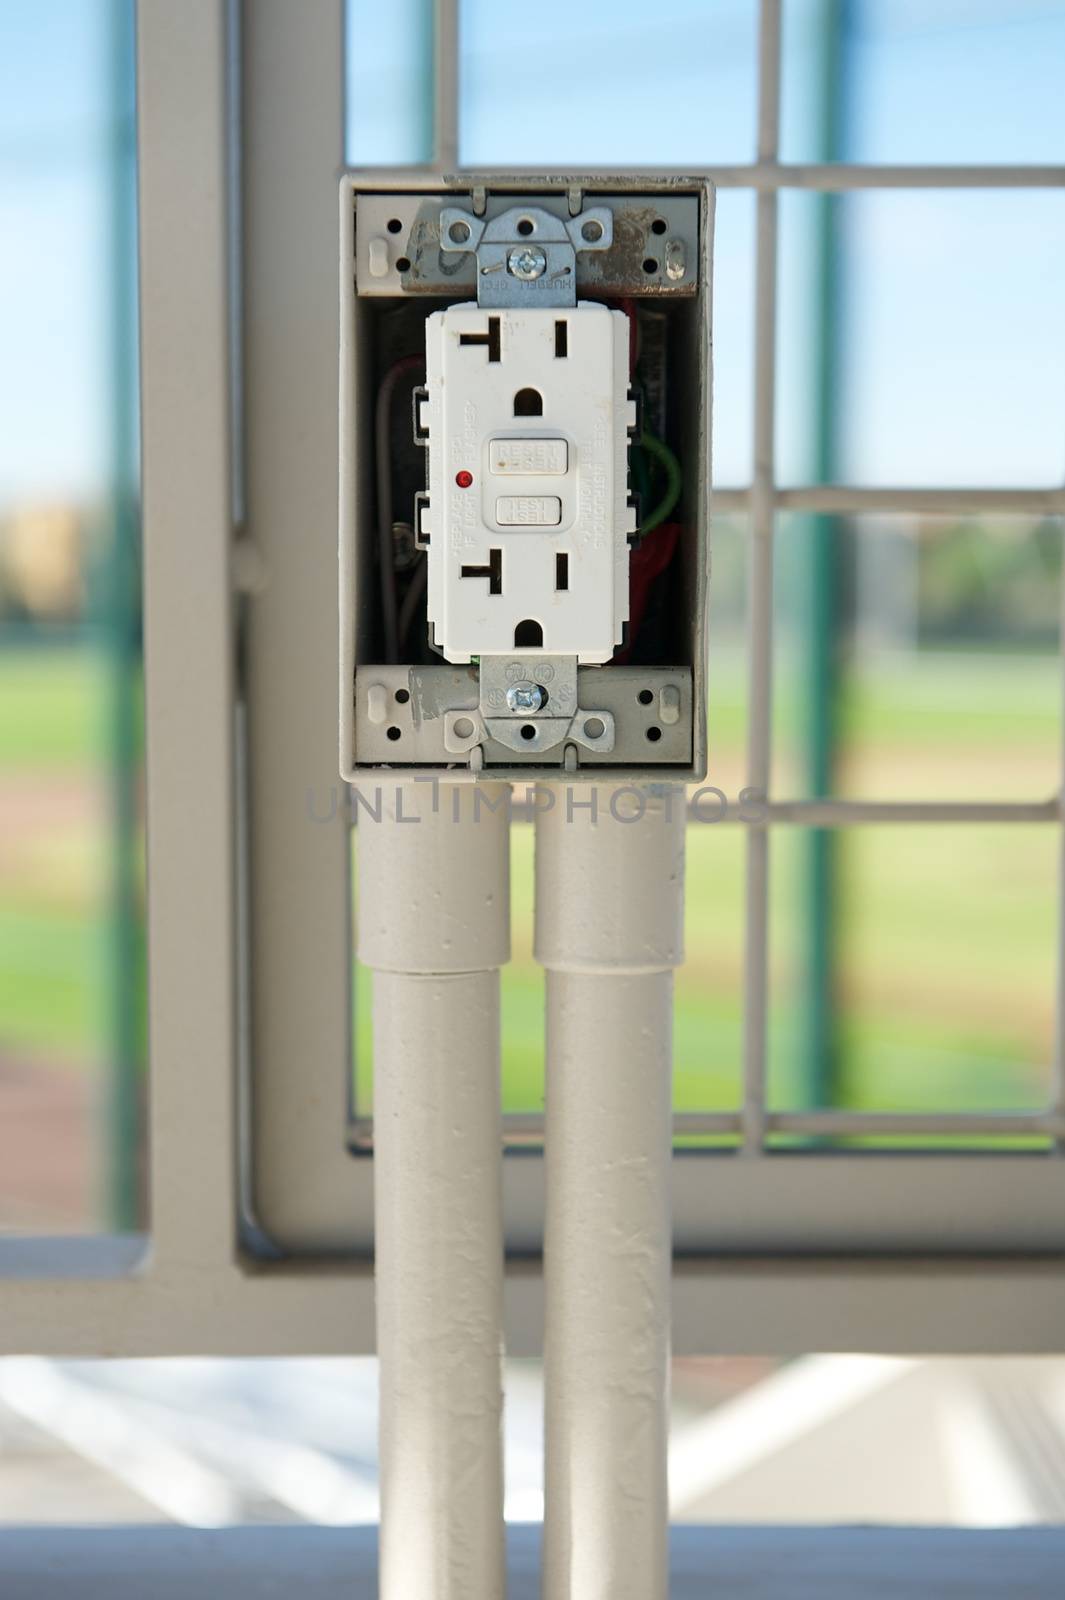 Newly Installed Electrical Outlet with GFCI by pixelsnap